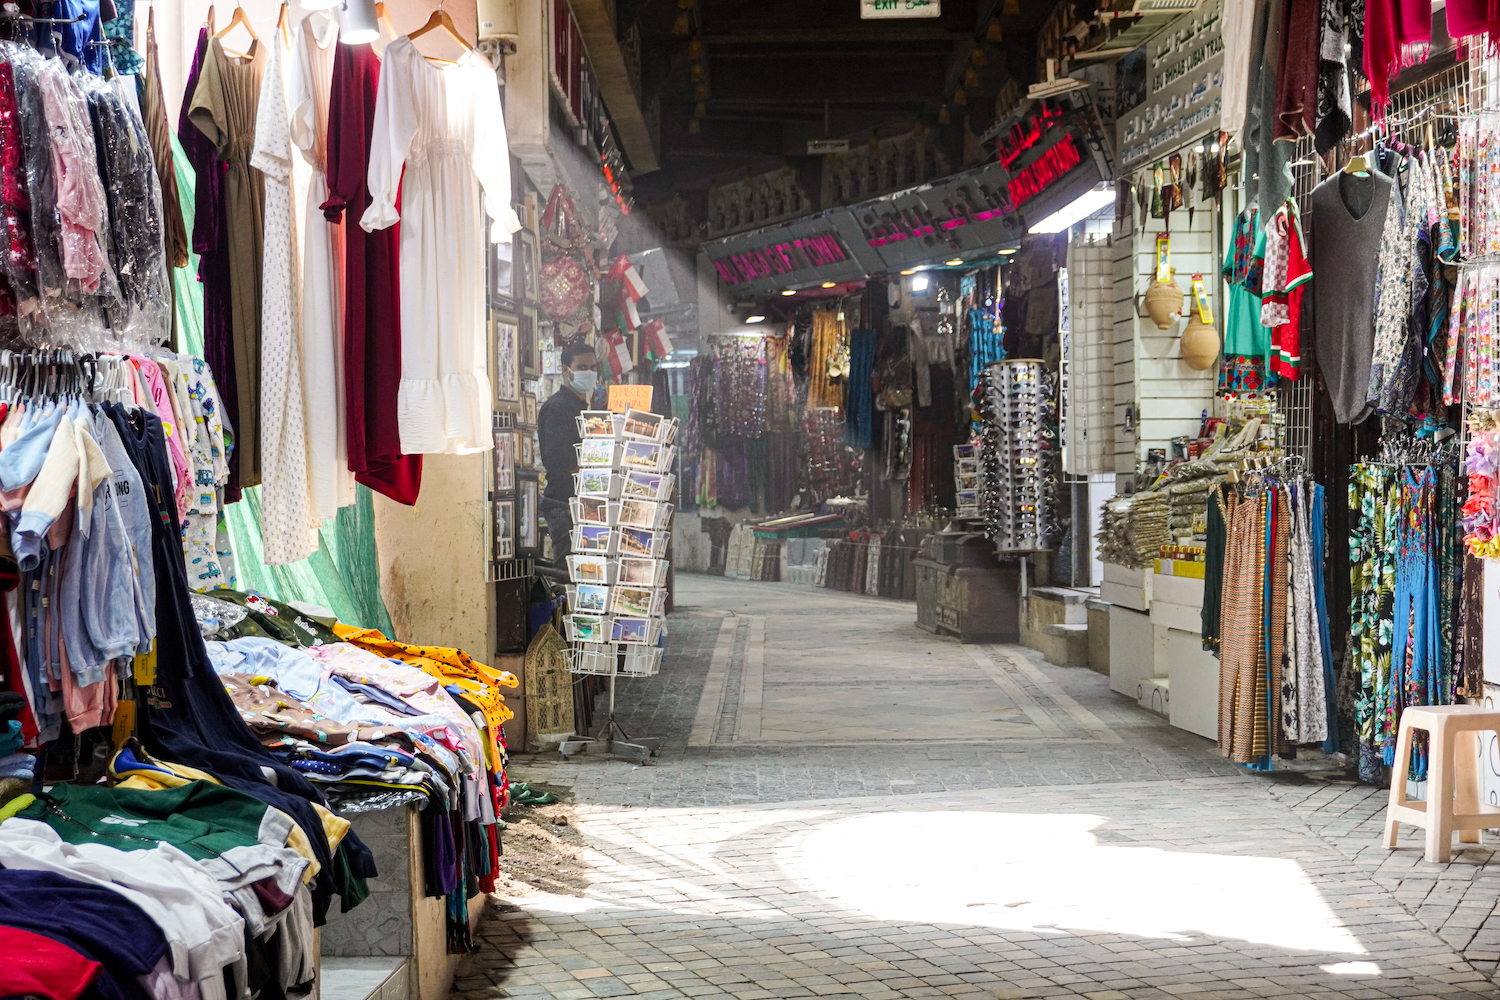 Sunlight pouring into the Mutrah Souq. Many clothes are lined up in stalls along the outdoor market.